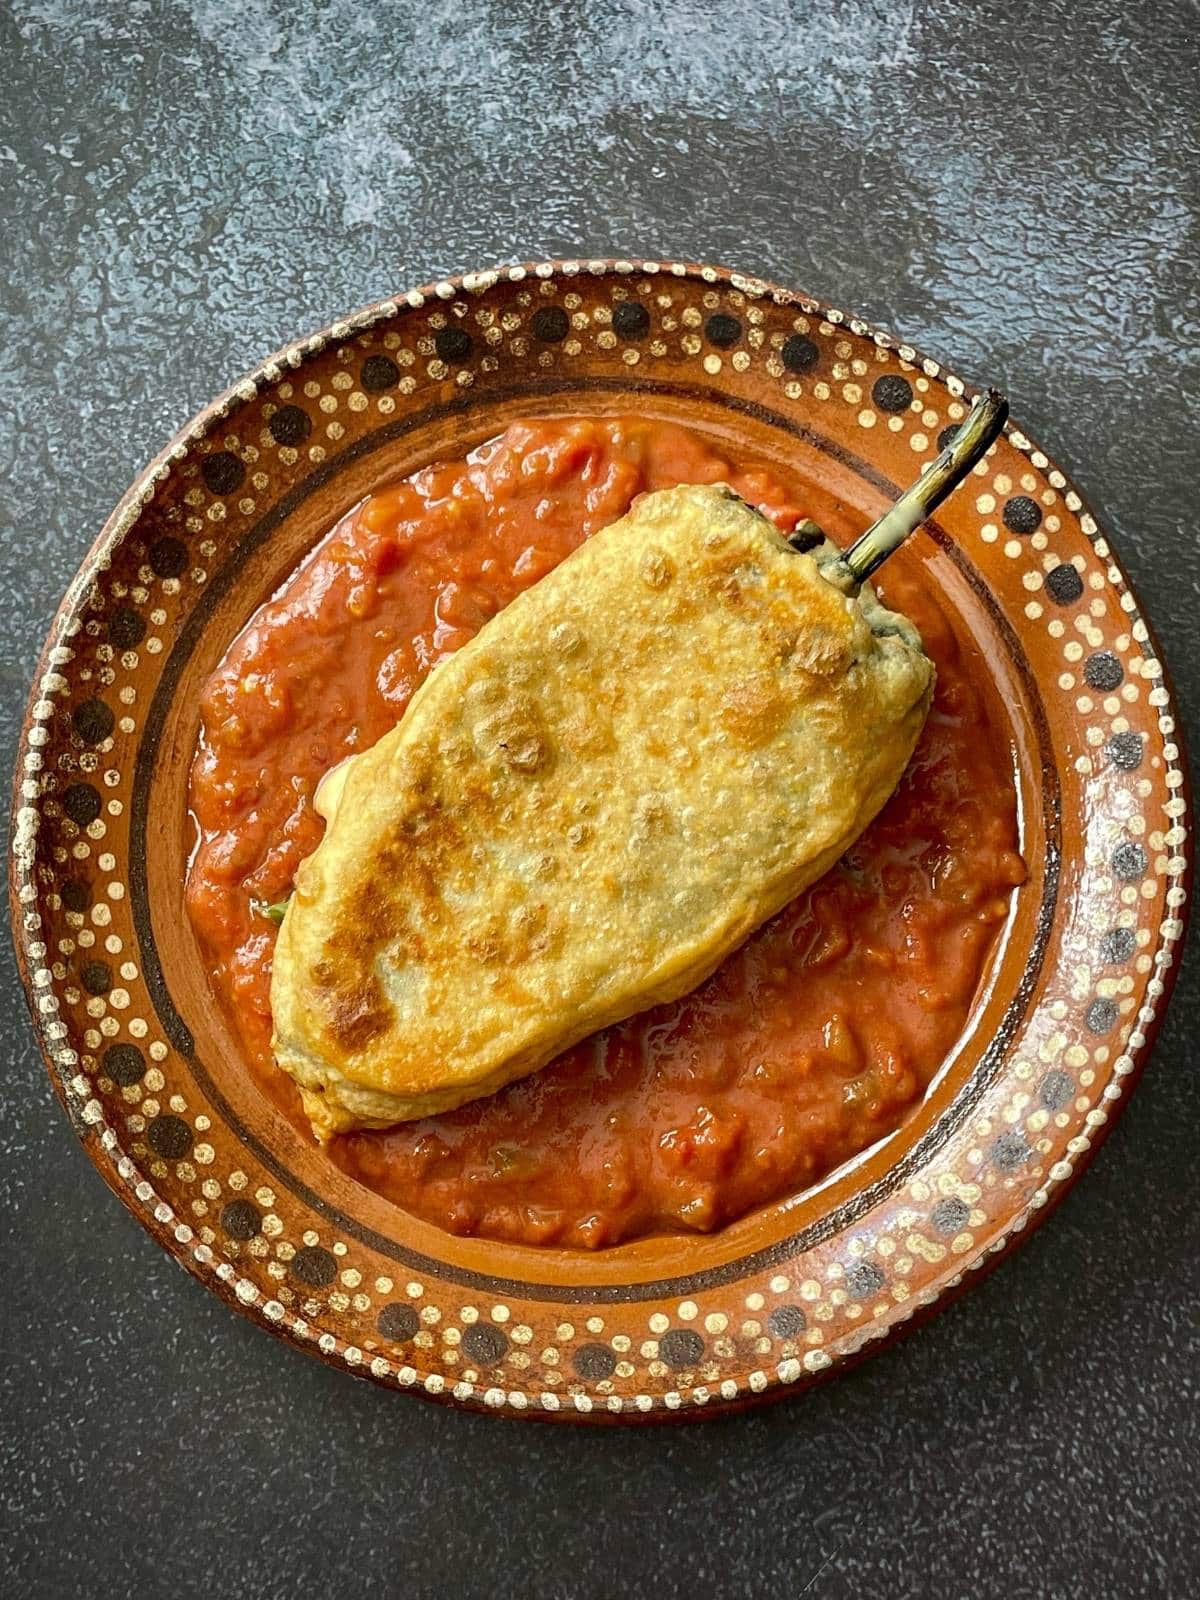 A cooked chile relleno on red chile sauce.